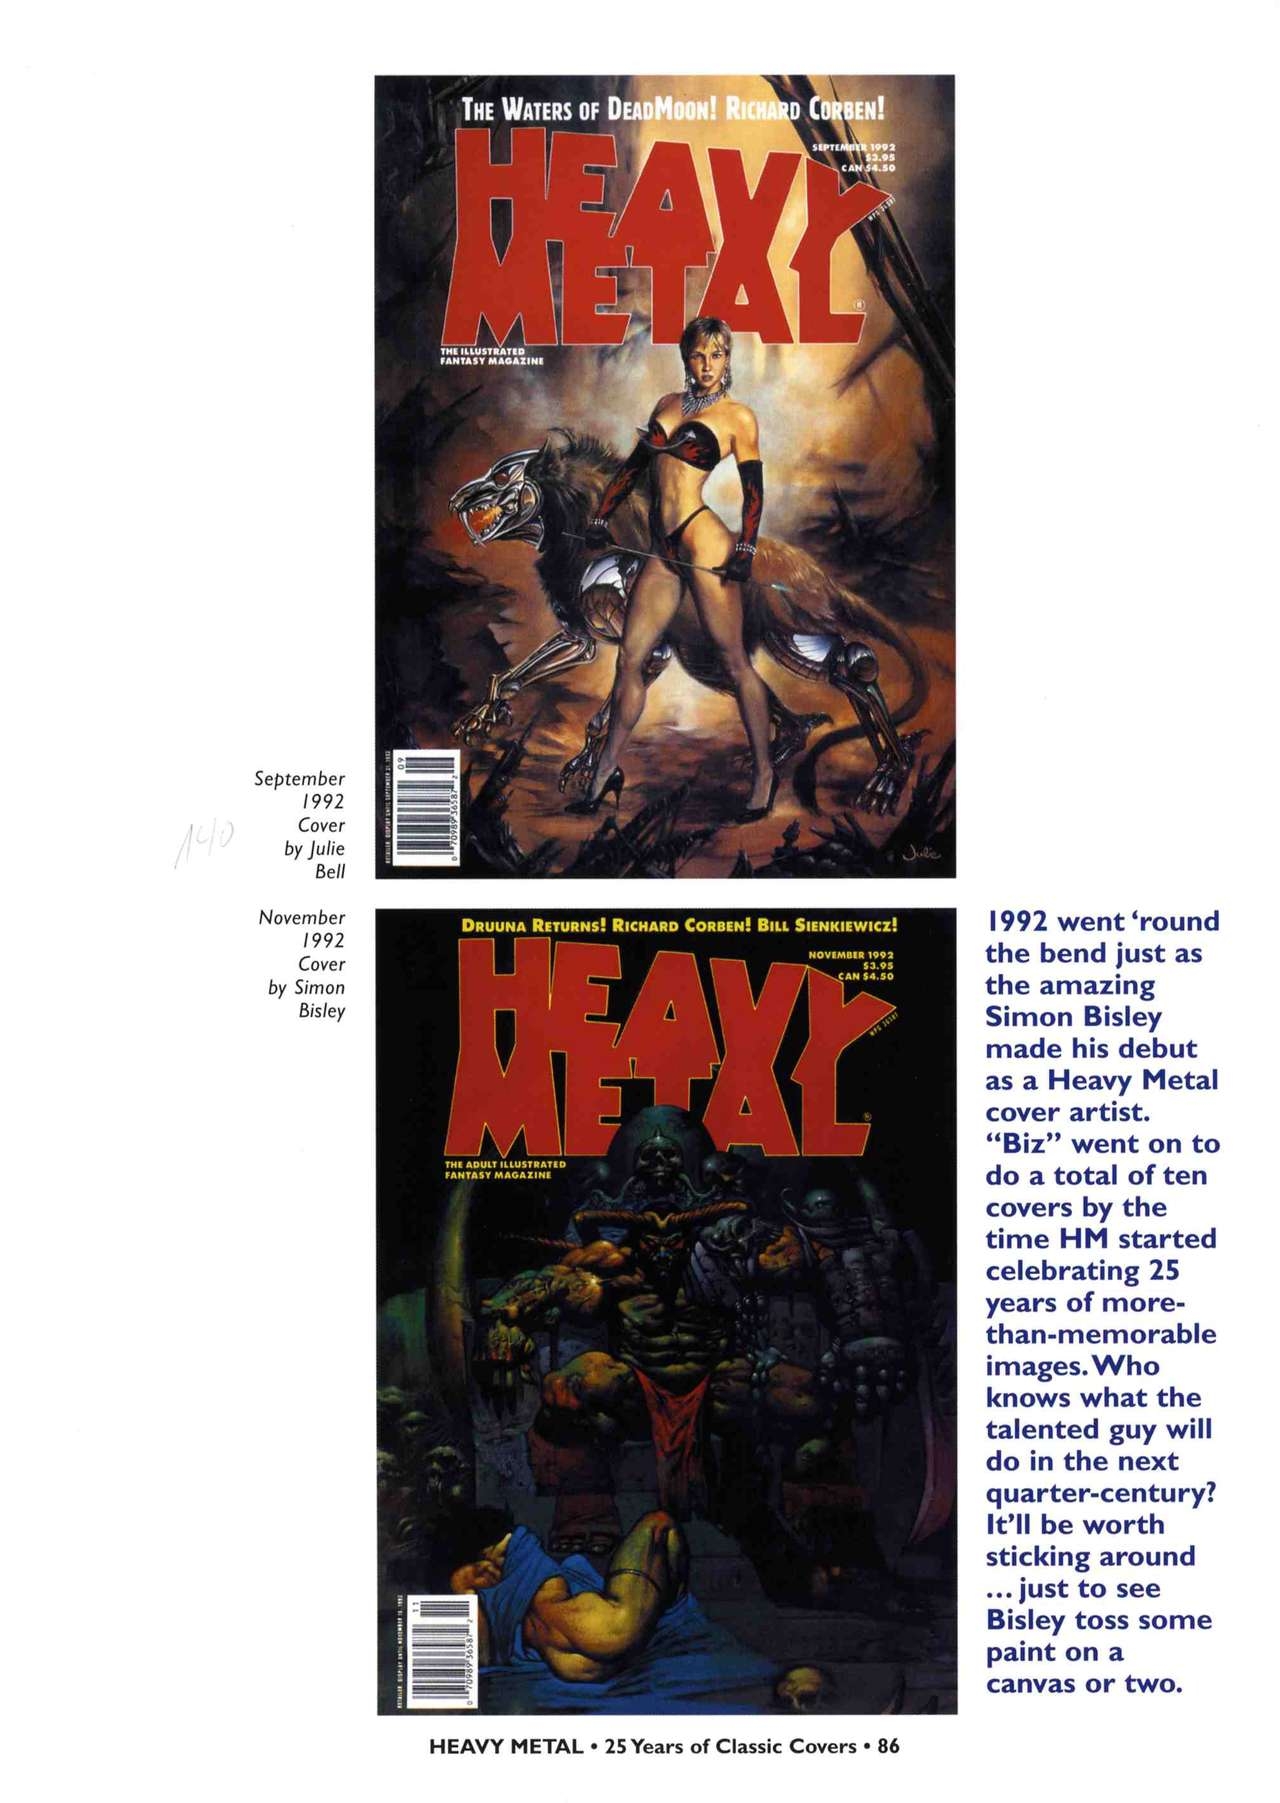 HEAVY METAL 25 Years of Classic Covers 91